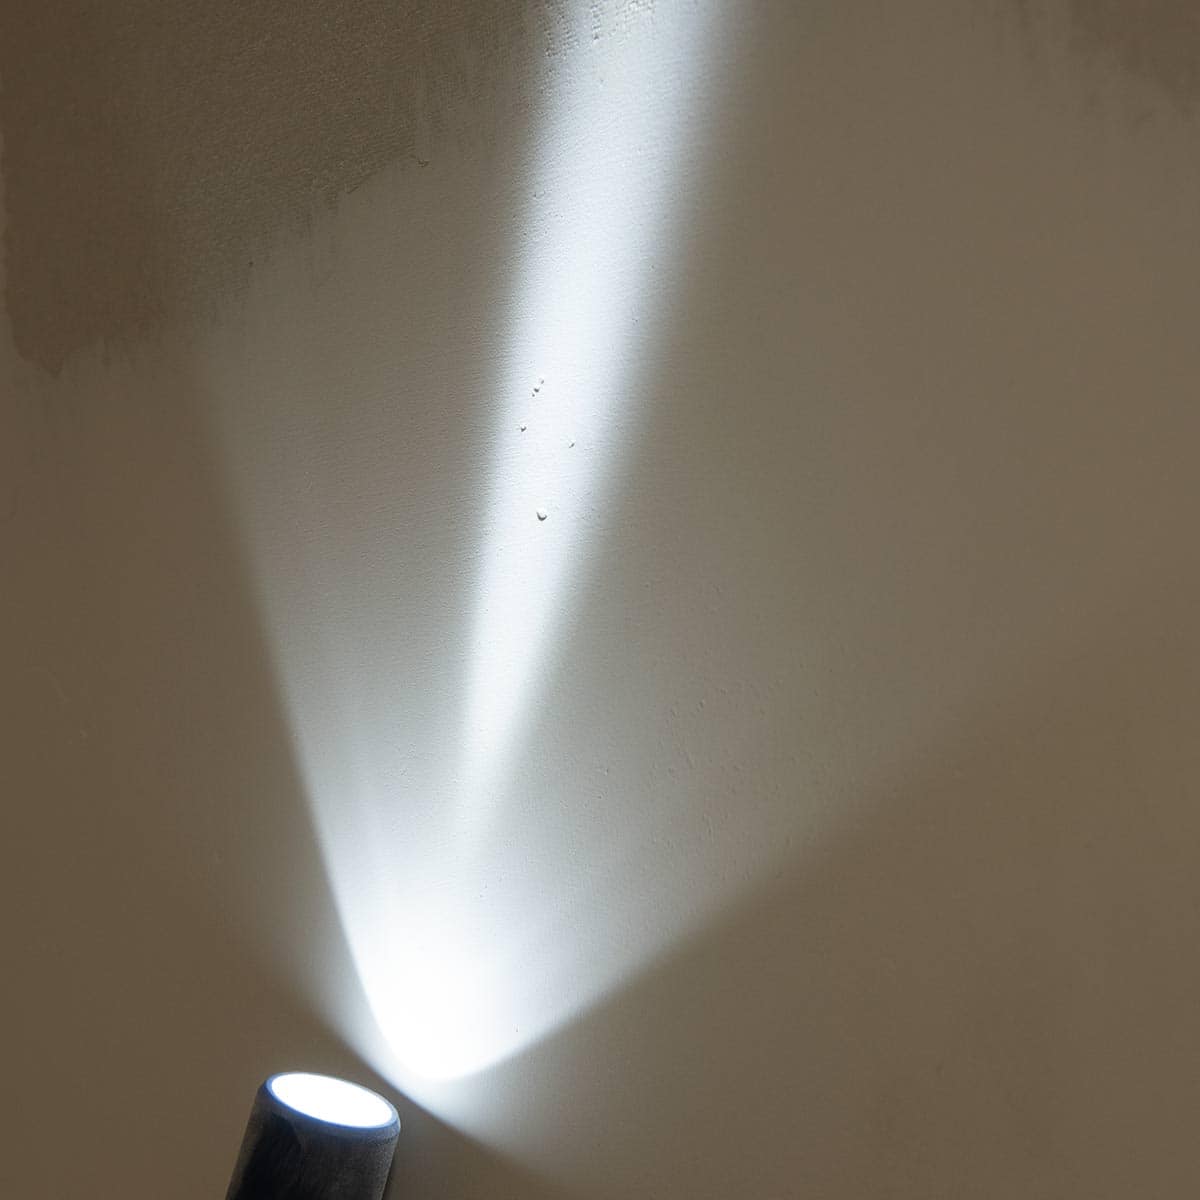 A flashlight being held up to spackle patch to reveal pin holes.